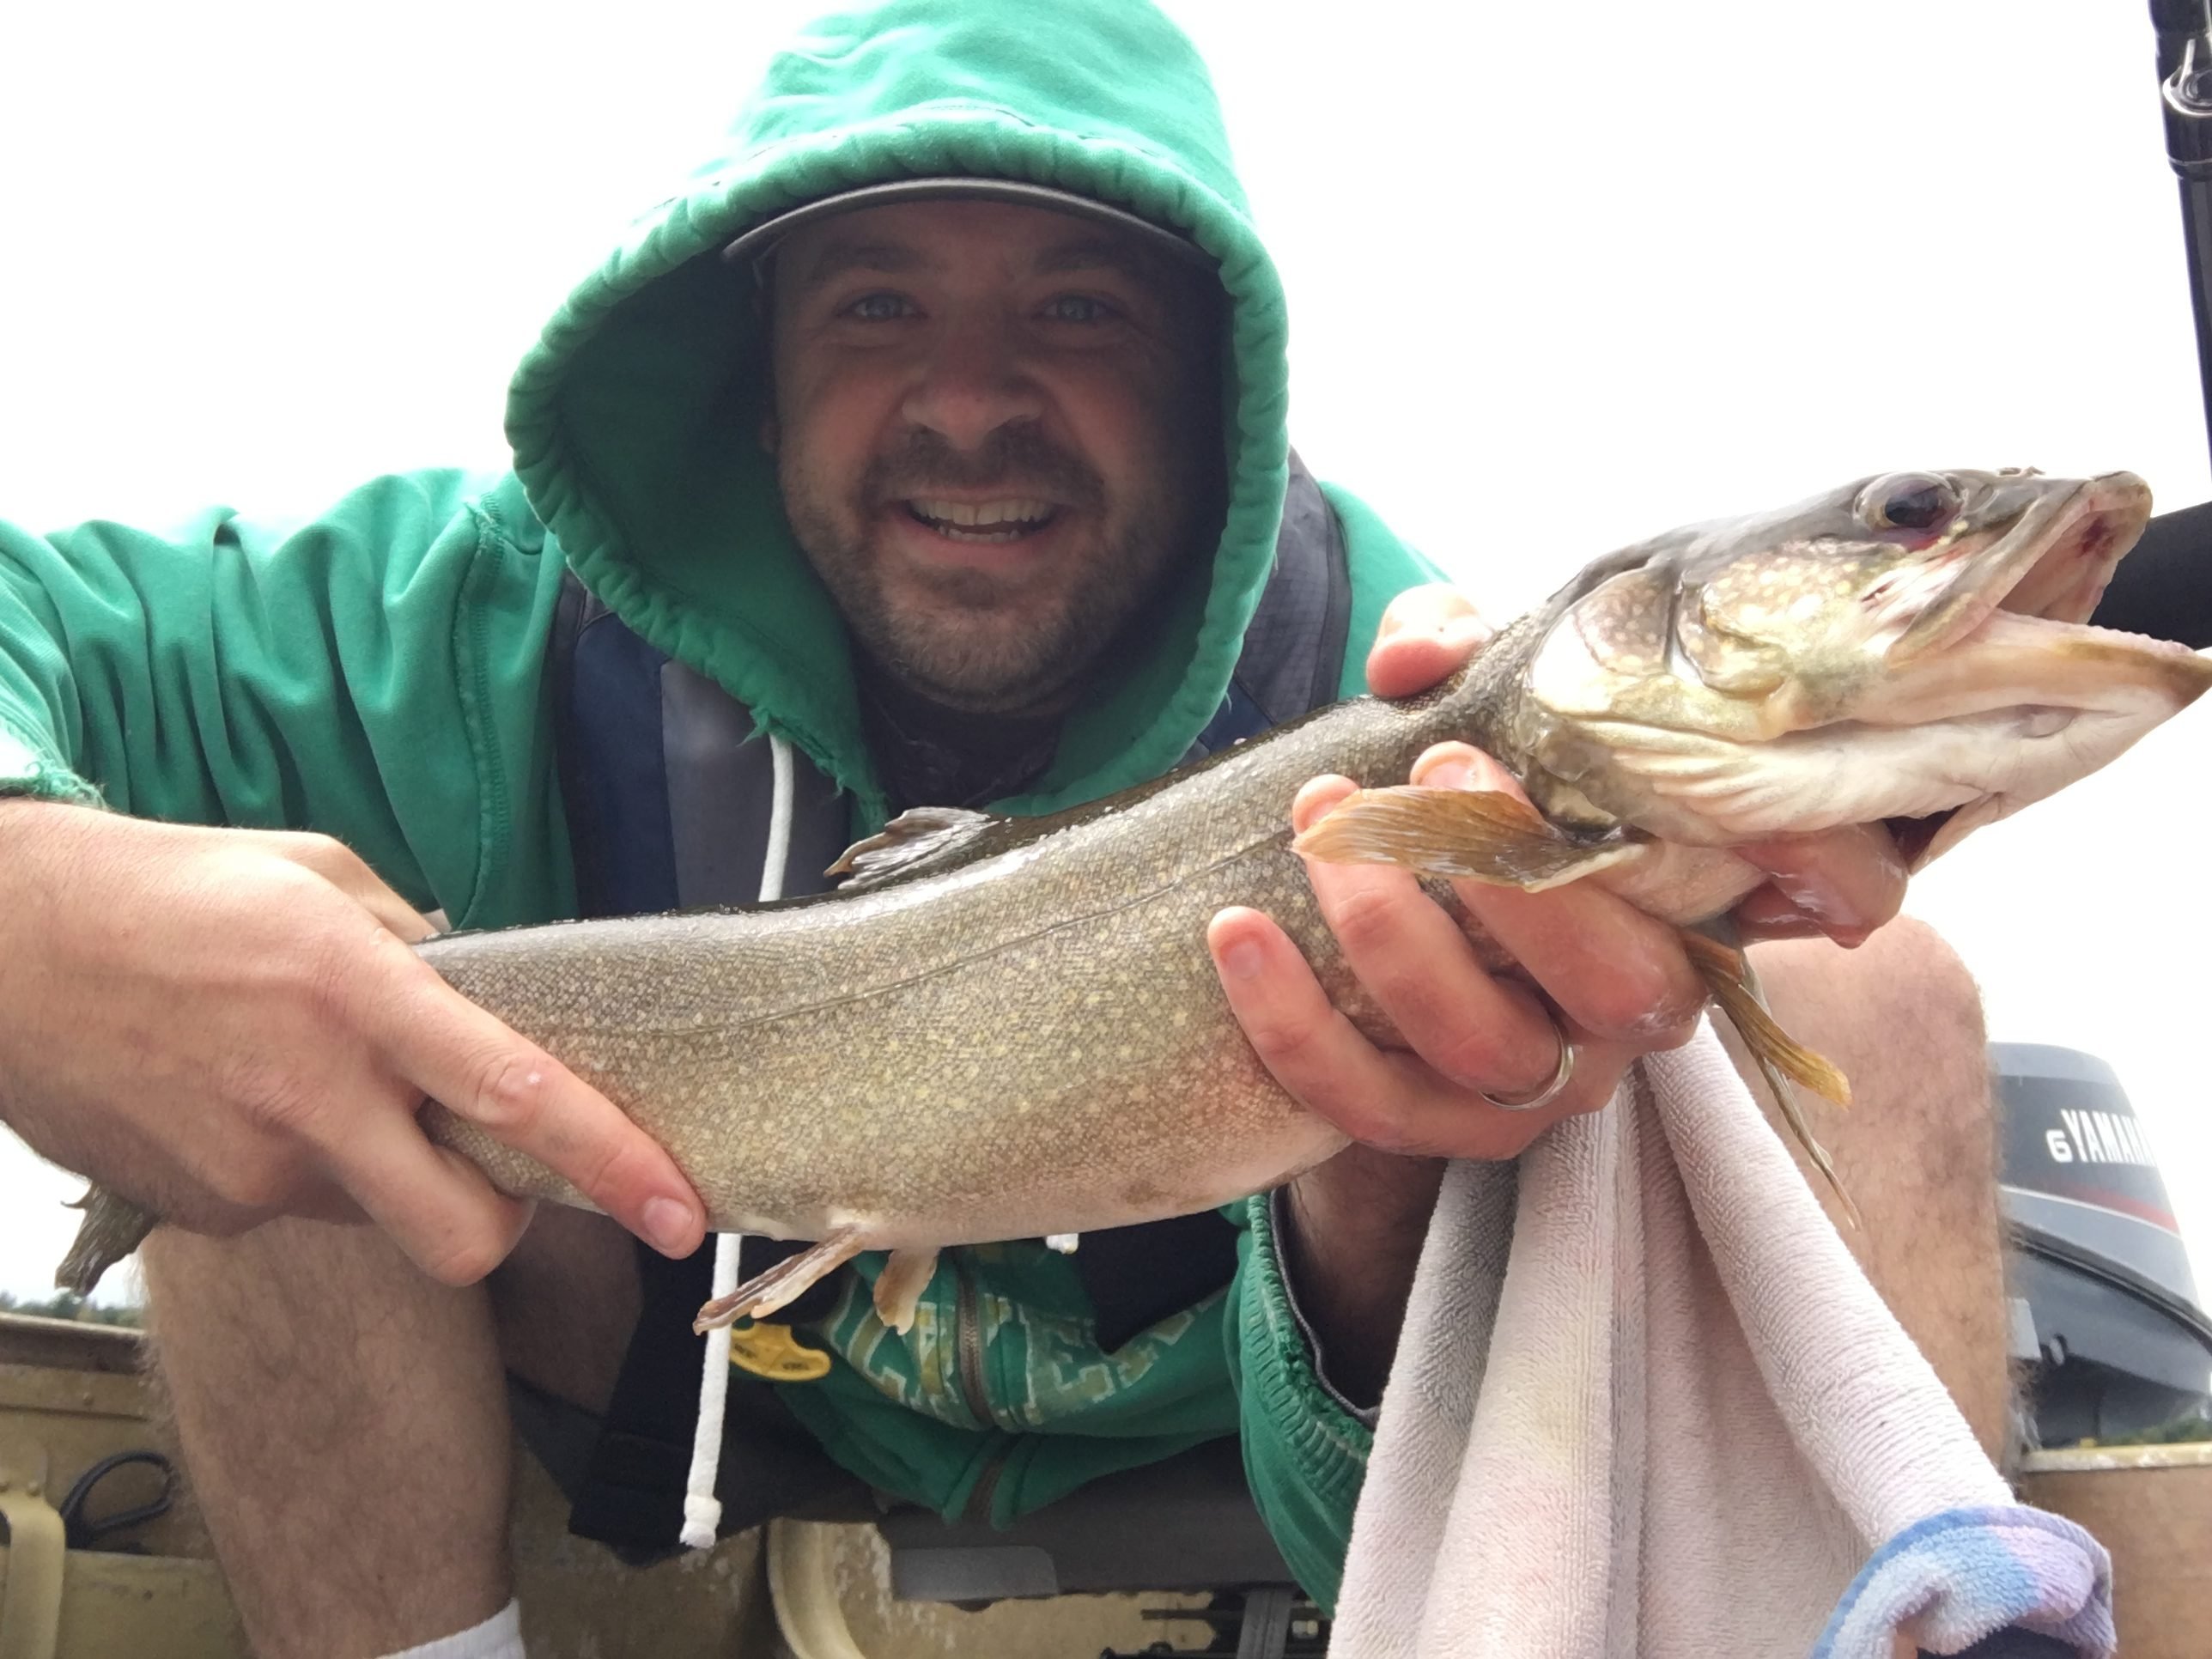 Lake Trout: Before or after storm? - General Discussion Forum